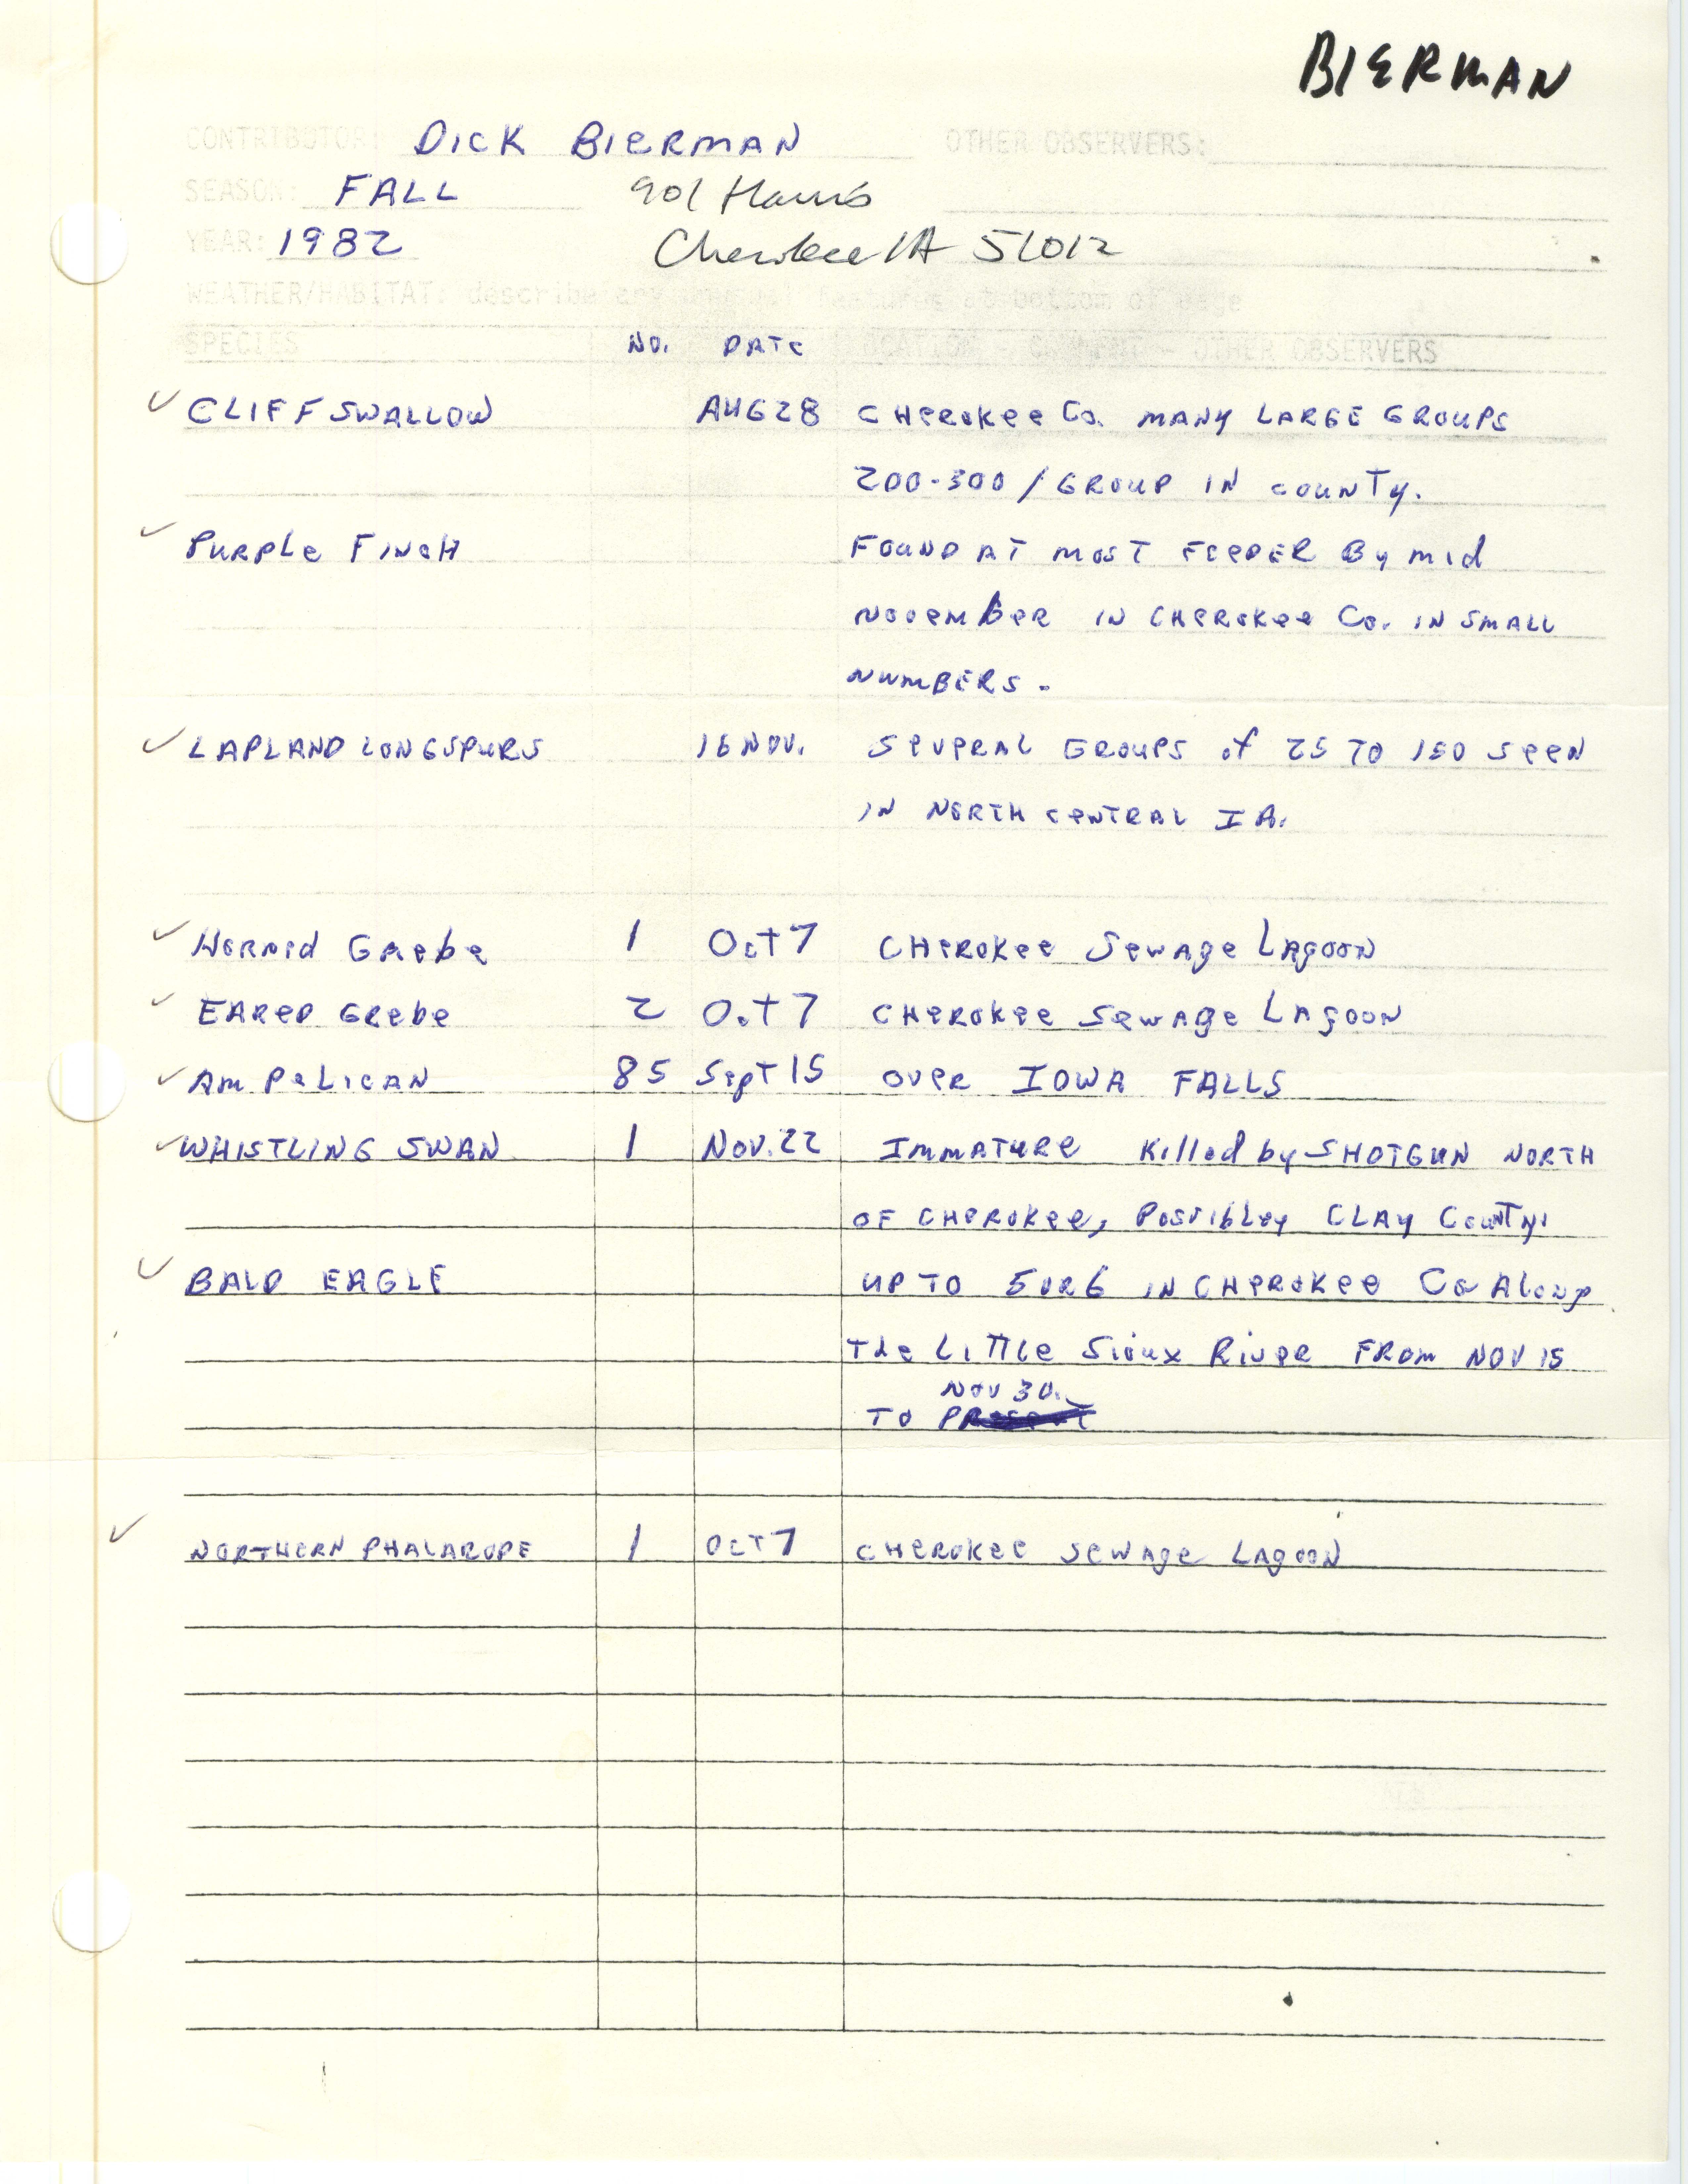 Field report contributed by Dick Bierman, fall 1982